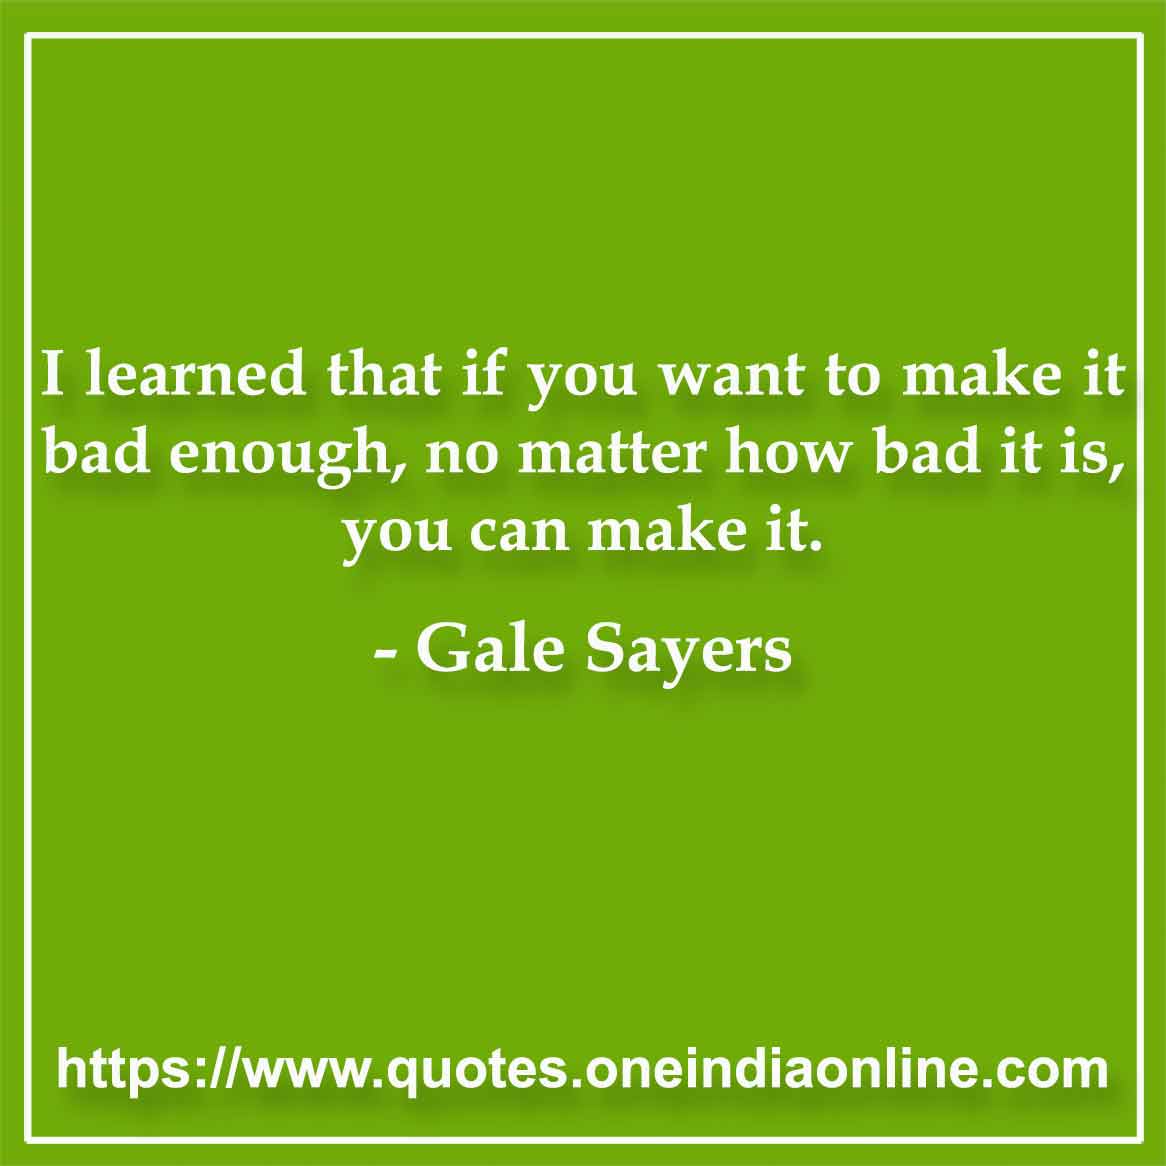 I learned that if you want to make it bad enough, no matter how bad it is, you can make it.

- Famous Quotations by Gale Sayers